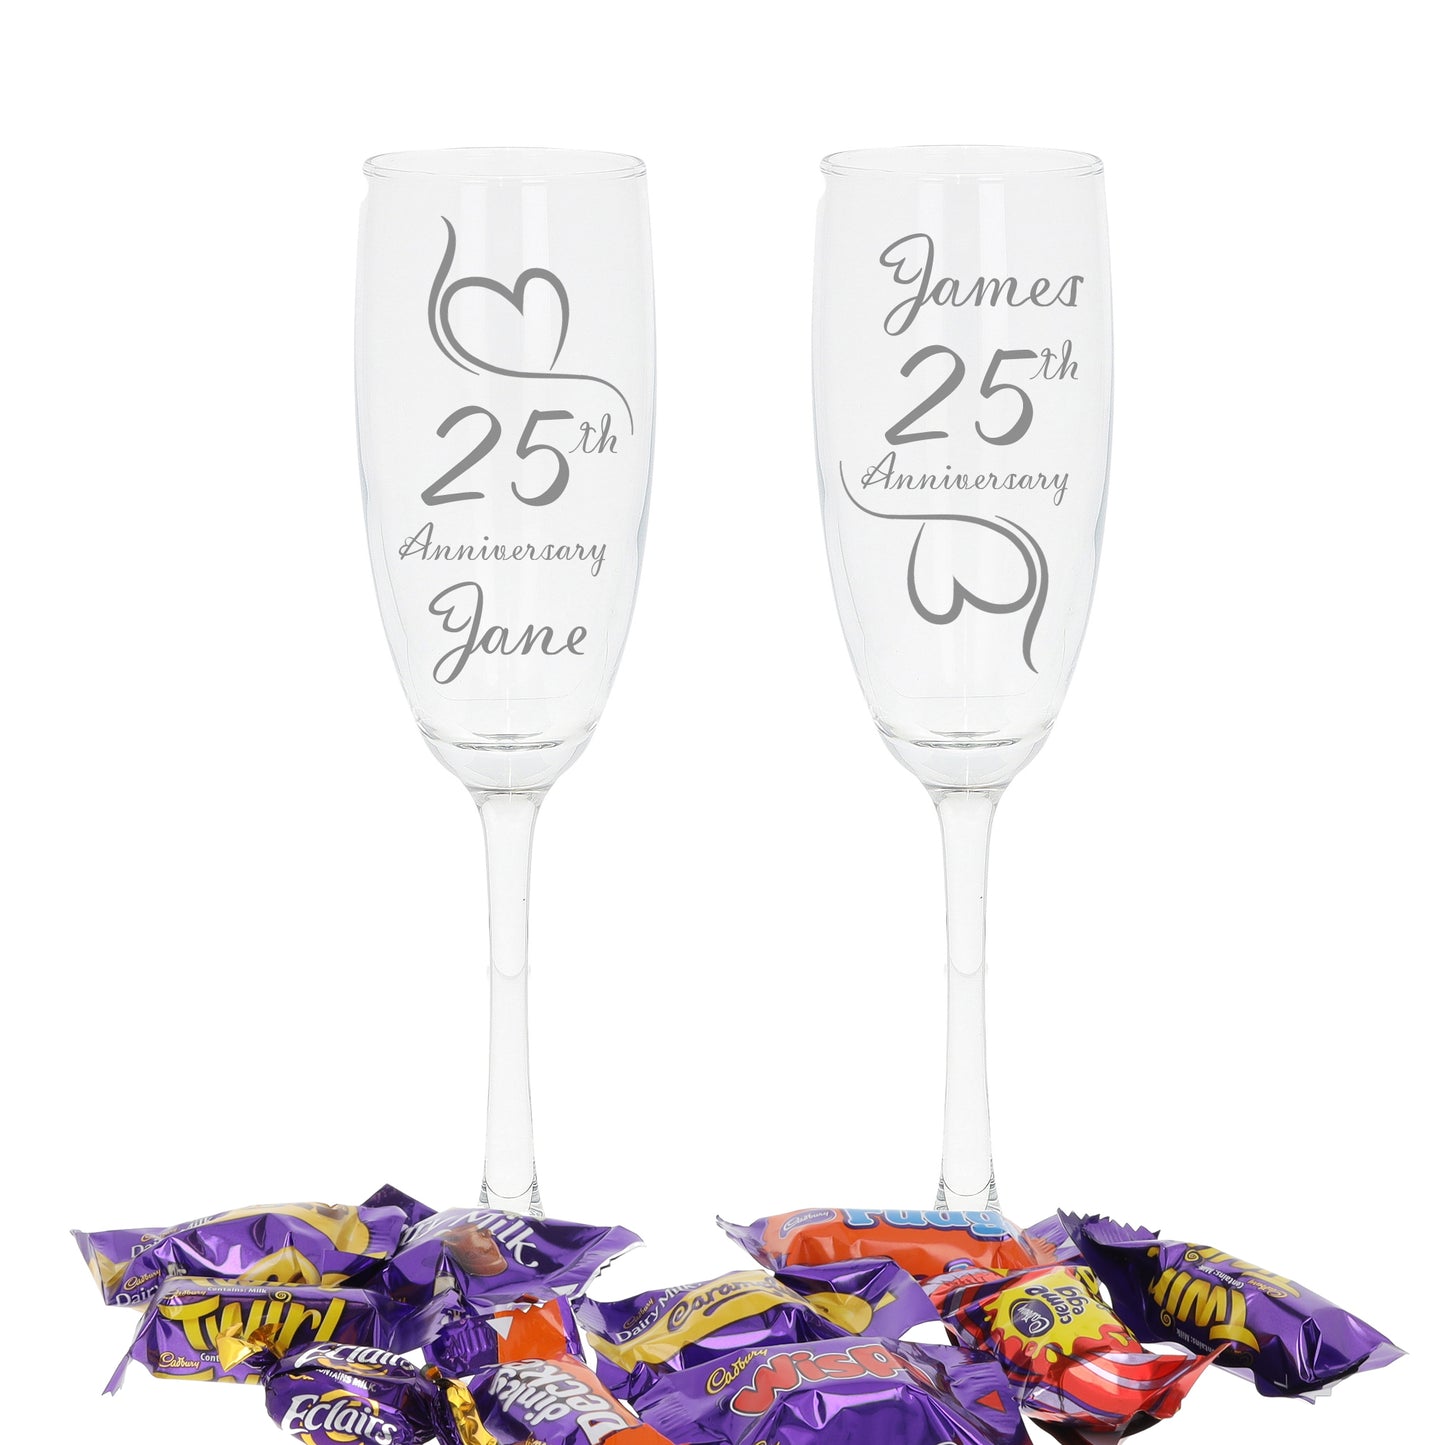 Engraved 25th Silver Wedding Anniversary Personalised Engraved Champagne Glass Gift Set  - Always Looking Good -   